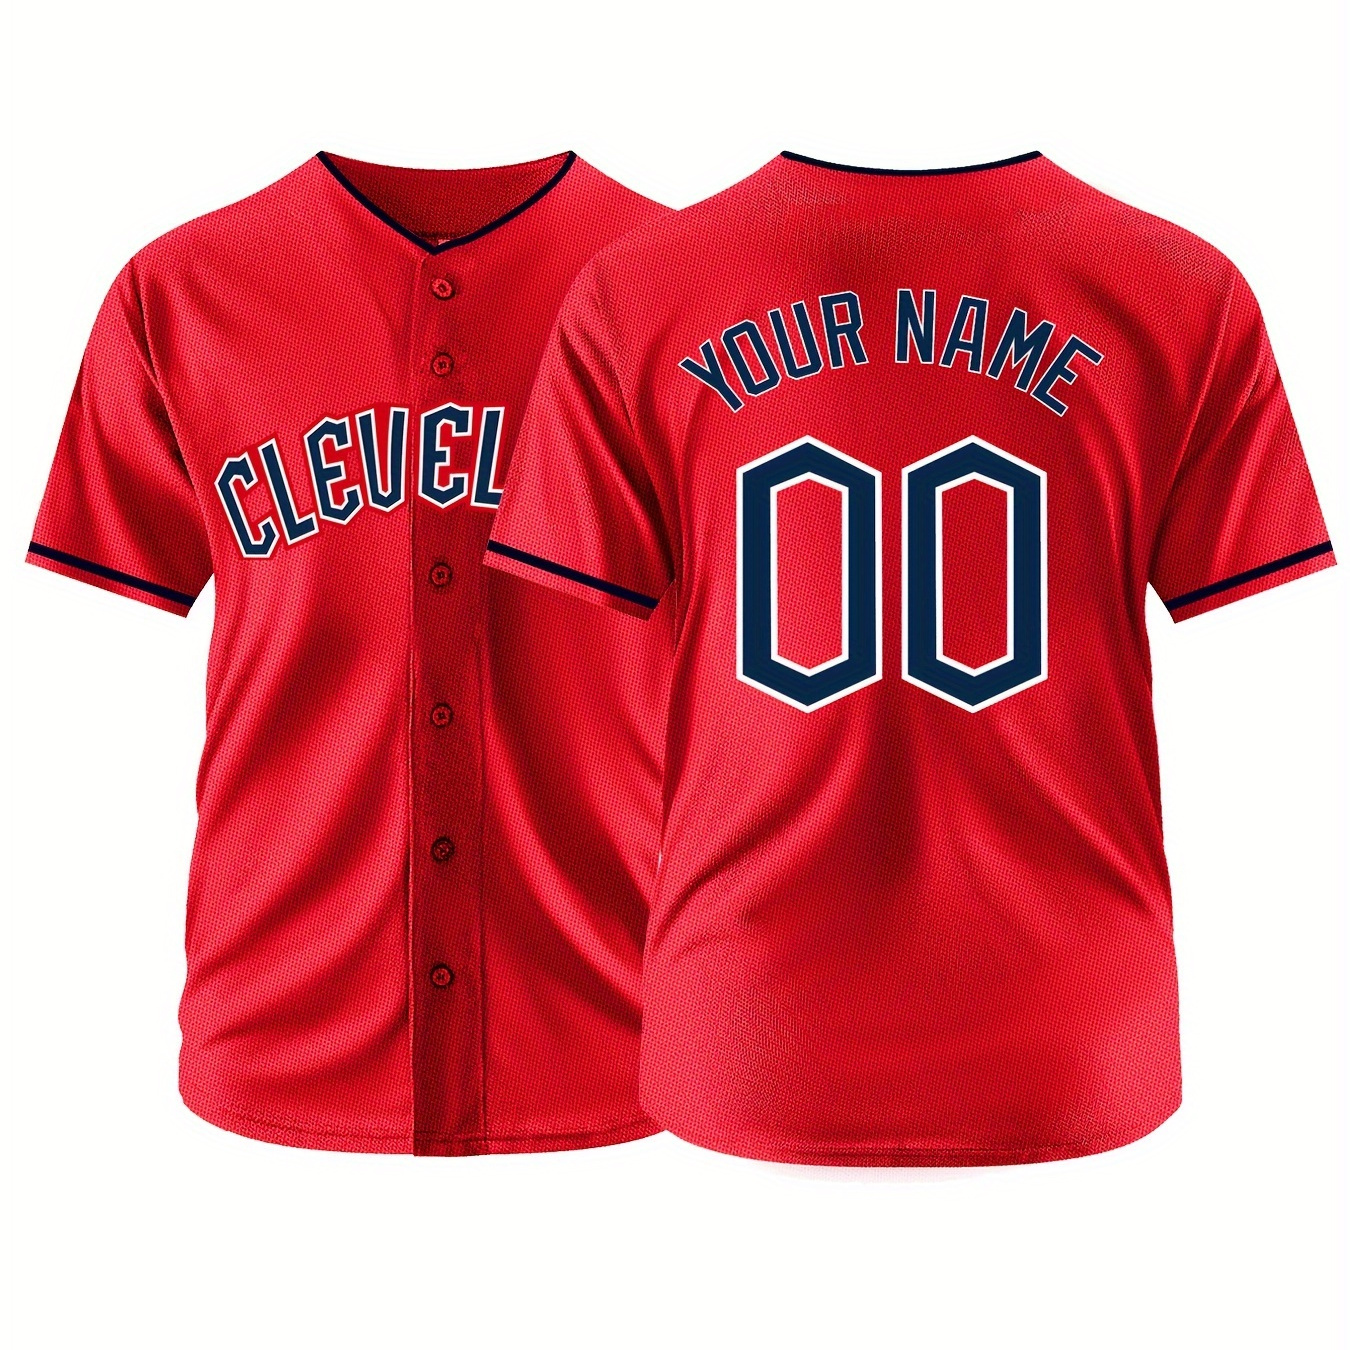 

Customized Name And Number, Embroidery Men's Baseball Jersey, Short Sleeve V-neck Button Up Sport Tops For Summer Training And Outdoors Sports Wear